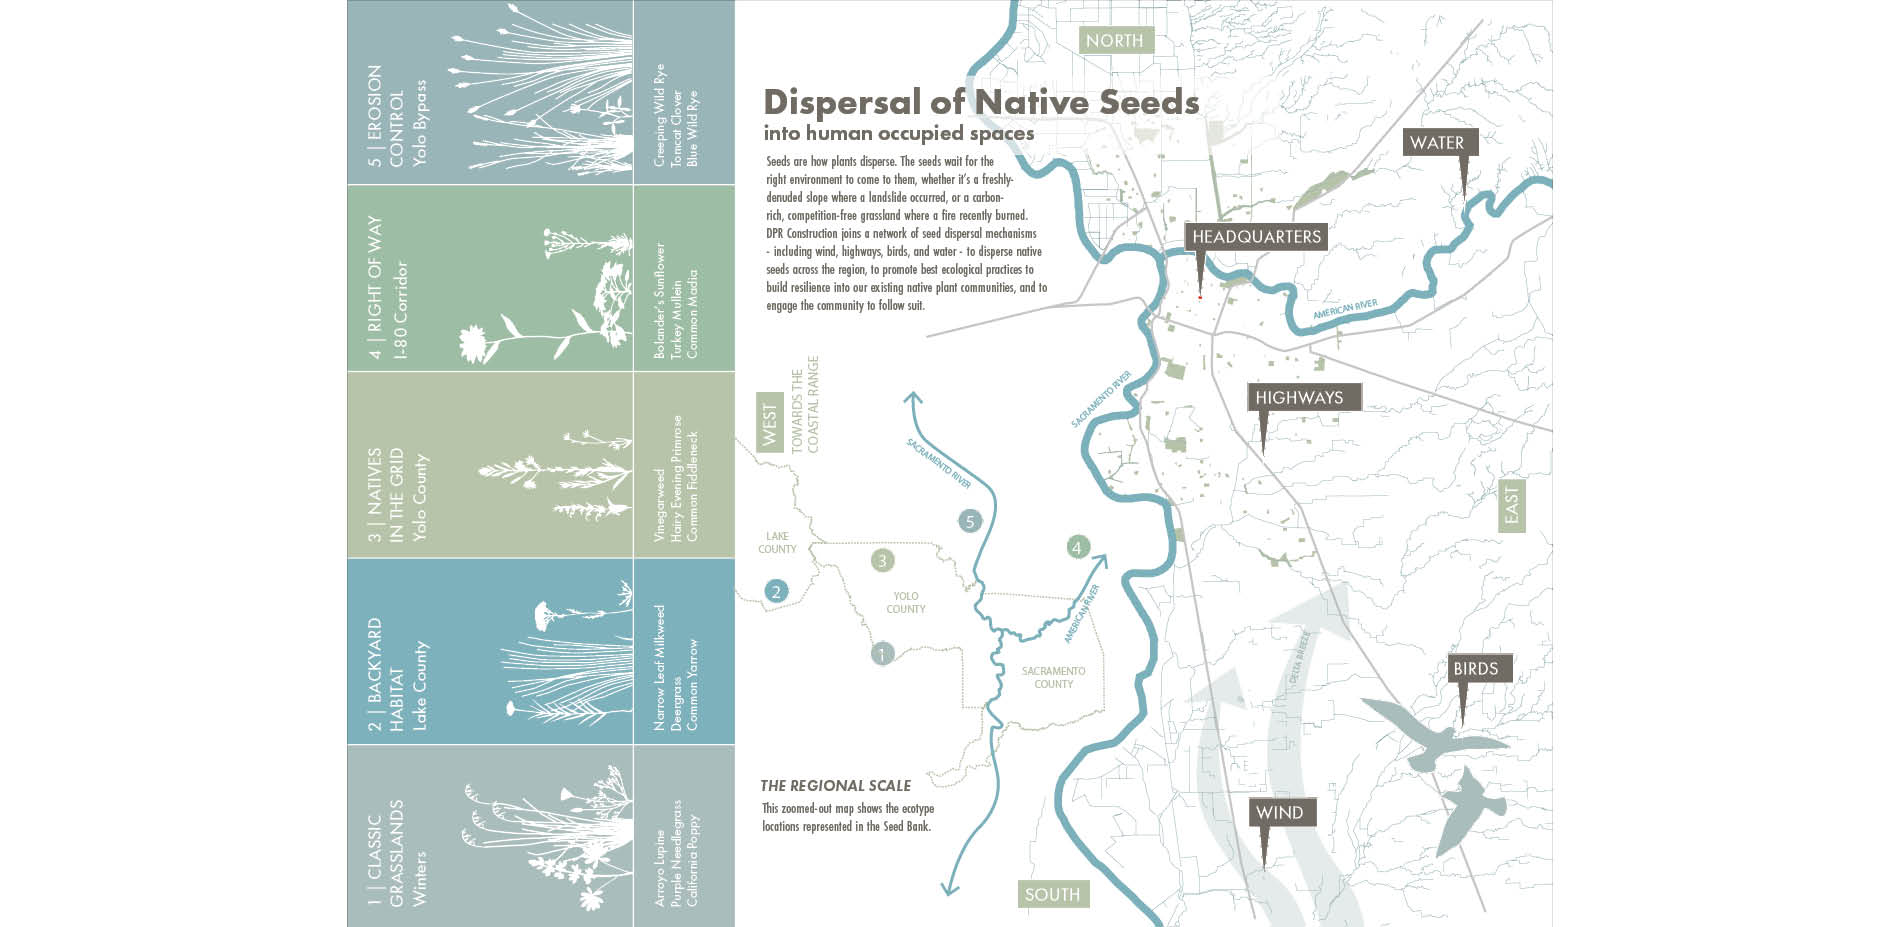 Dispersal of Native Seeds